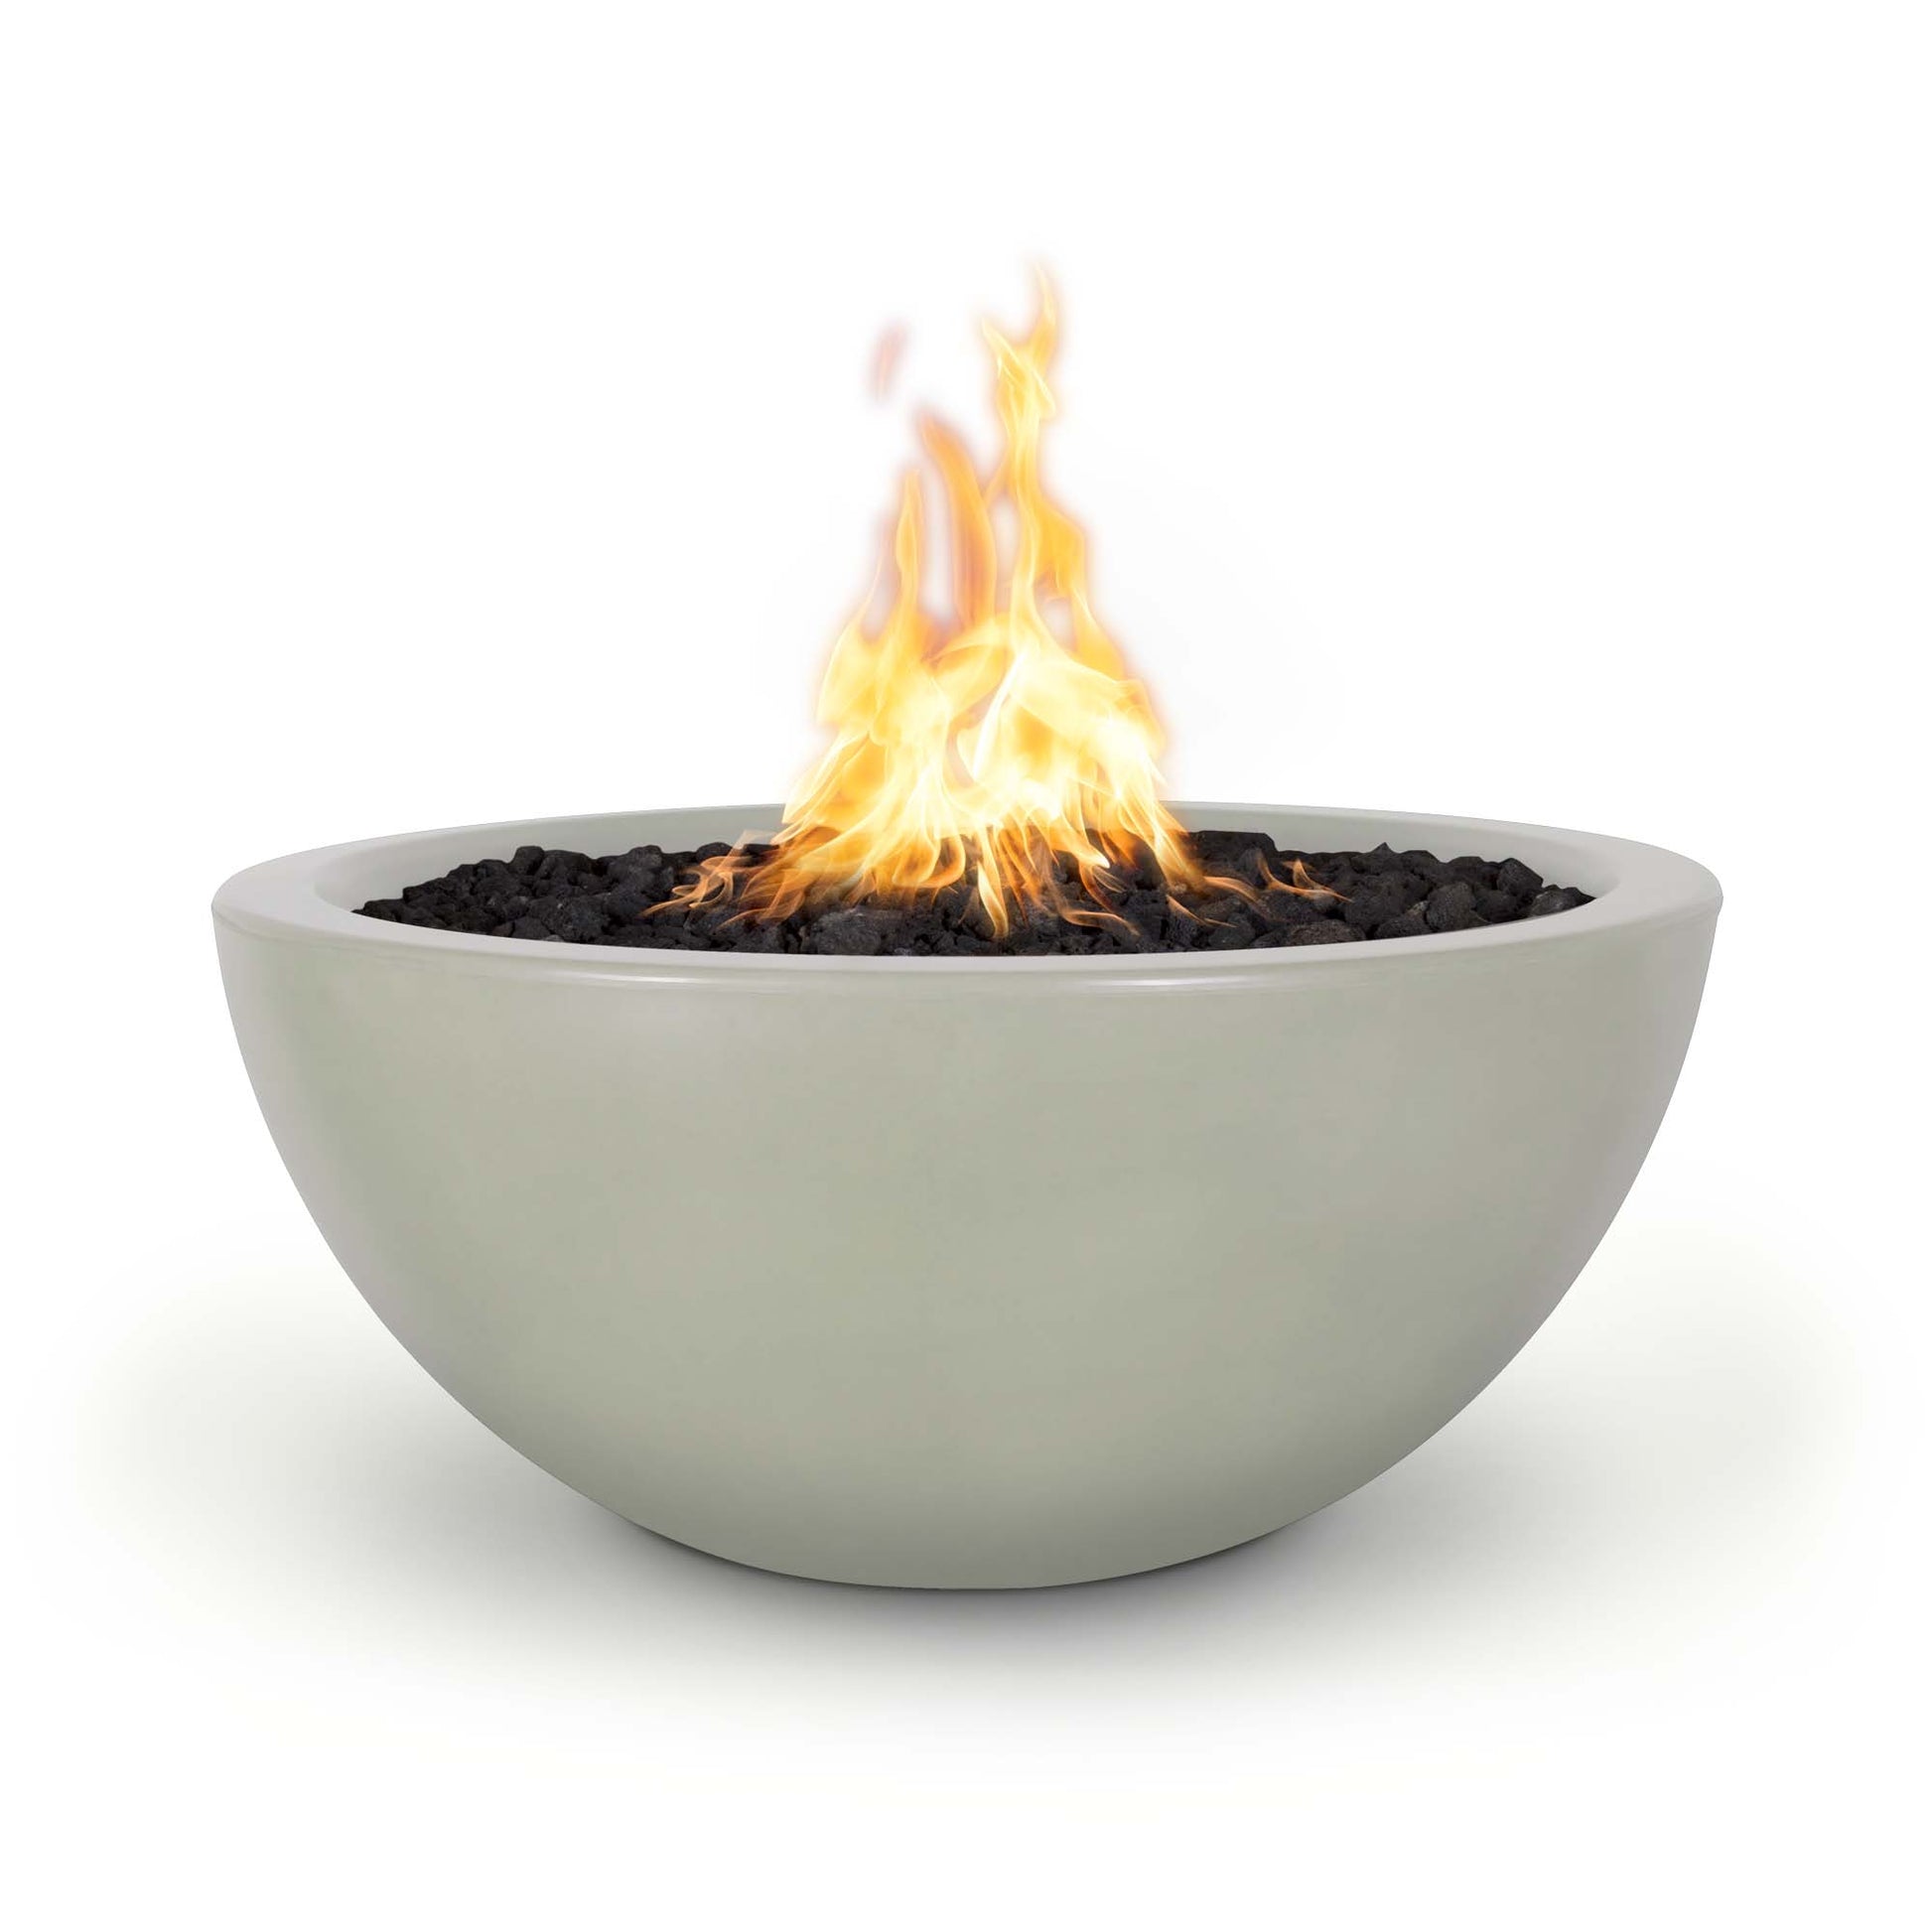 The Outdoor Plus Round Luna 38" Metallic Copper GFRC Concrete Natural Gas Fire Bowl with Match Lit with Flame Sense Ignition